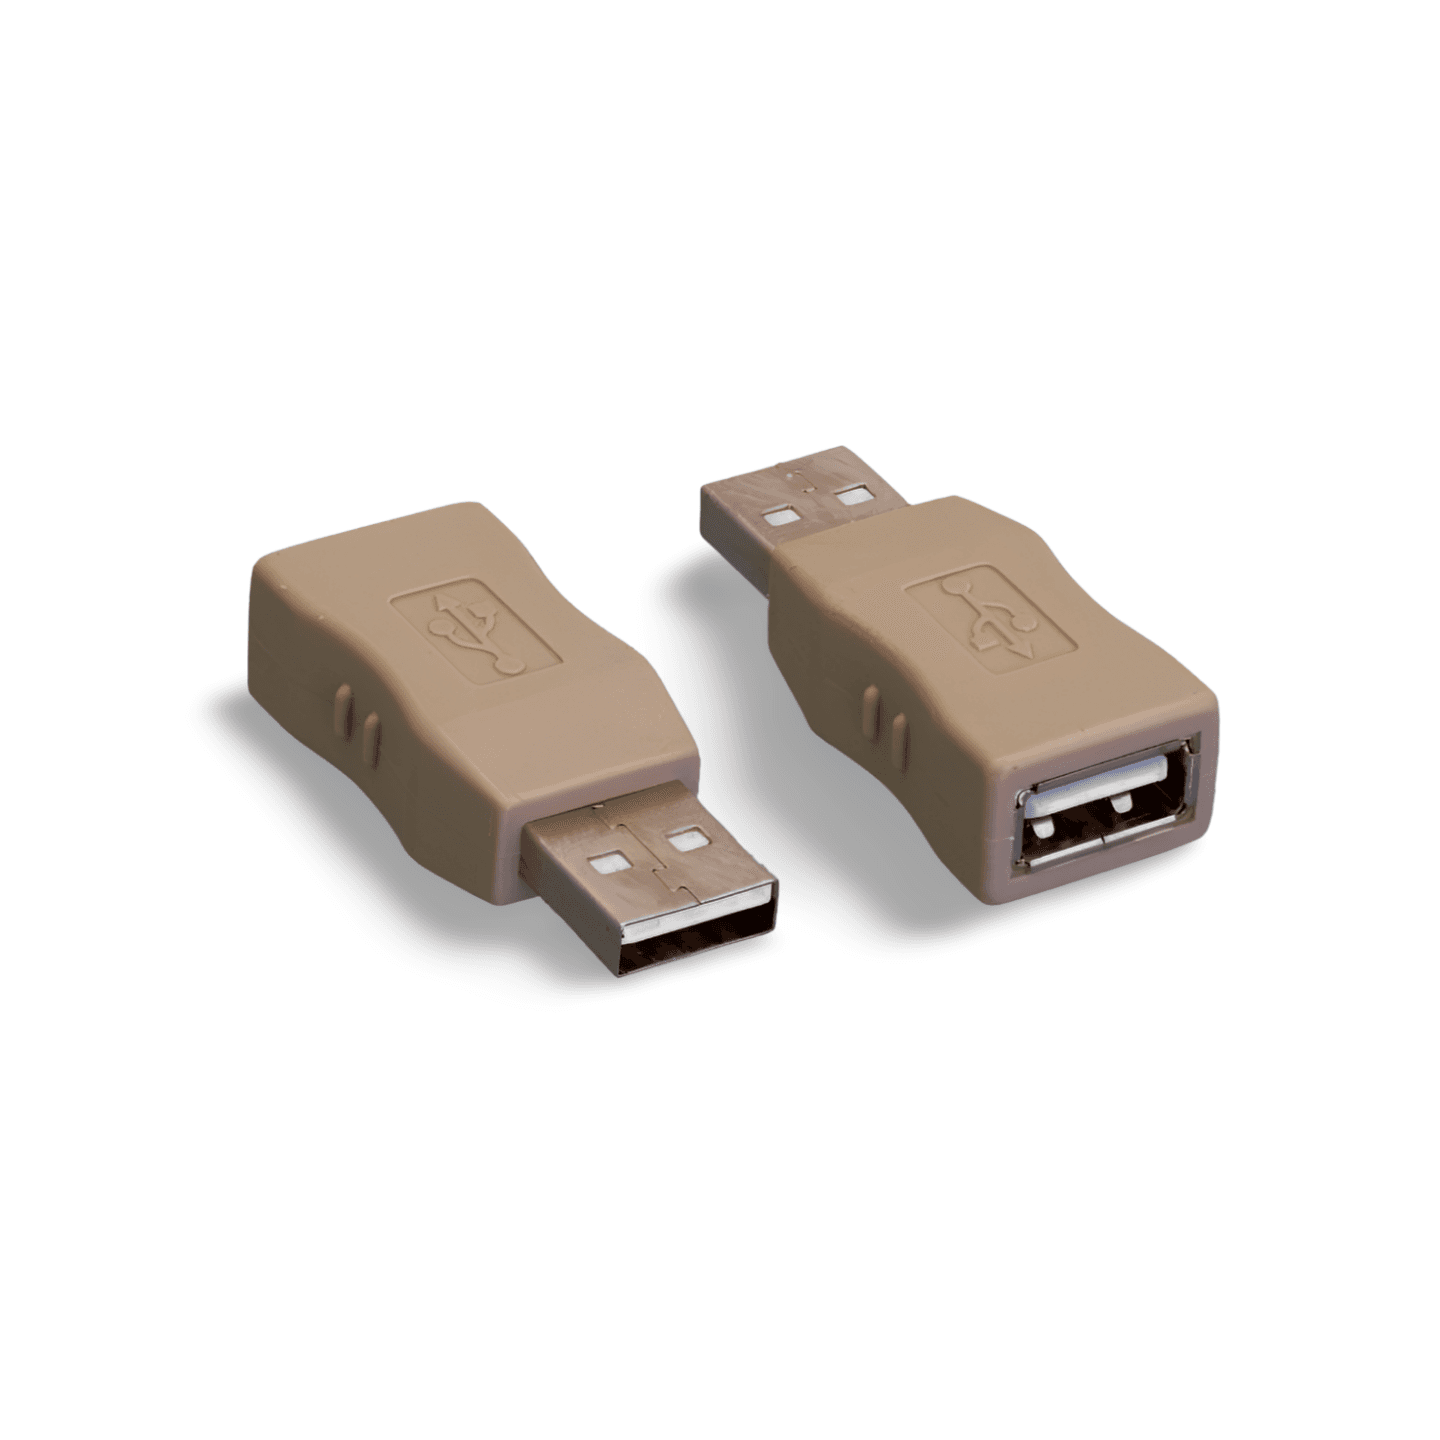 1in USB 2.0 Port Protector USB Type A Male to Type A Female beige